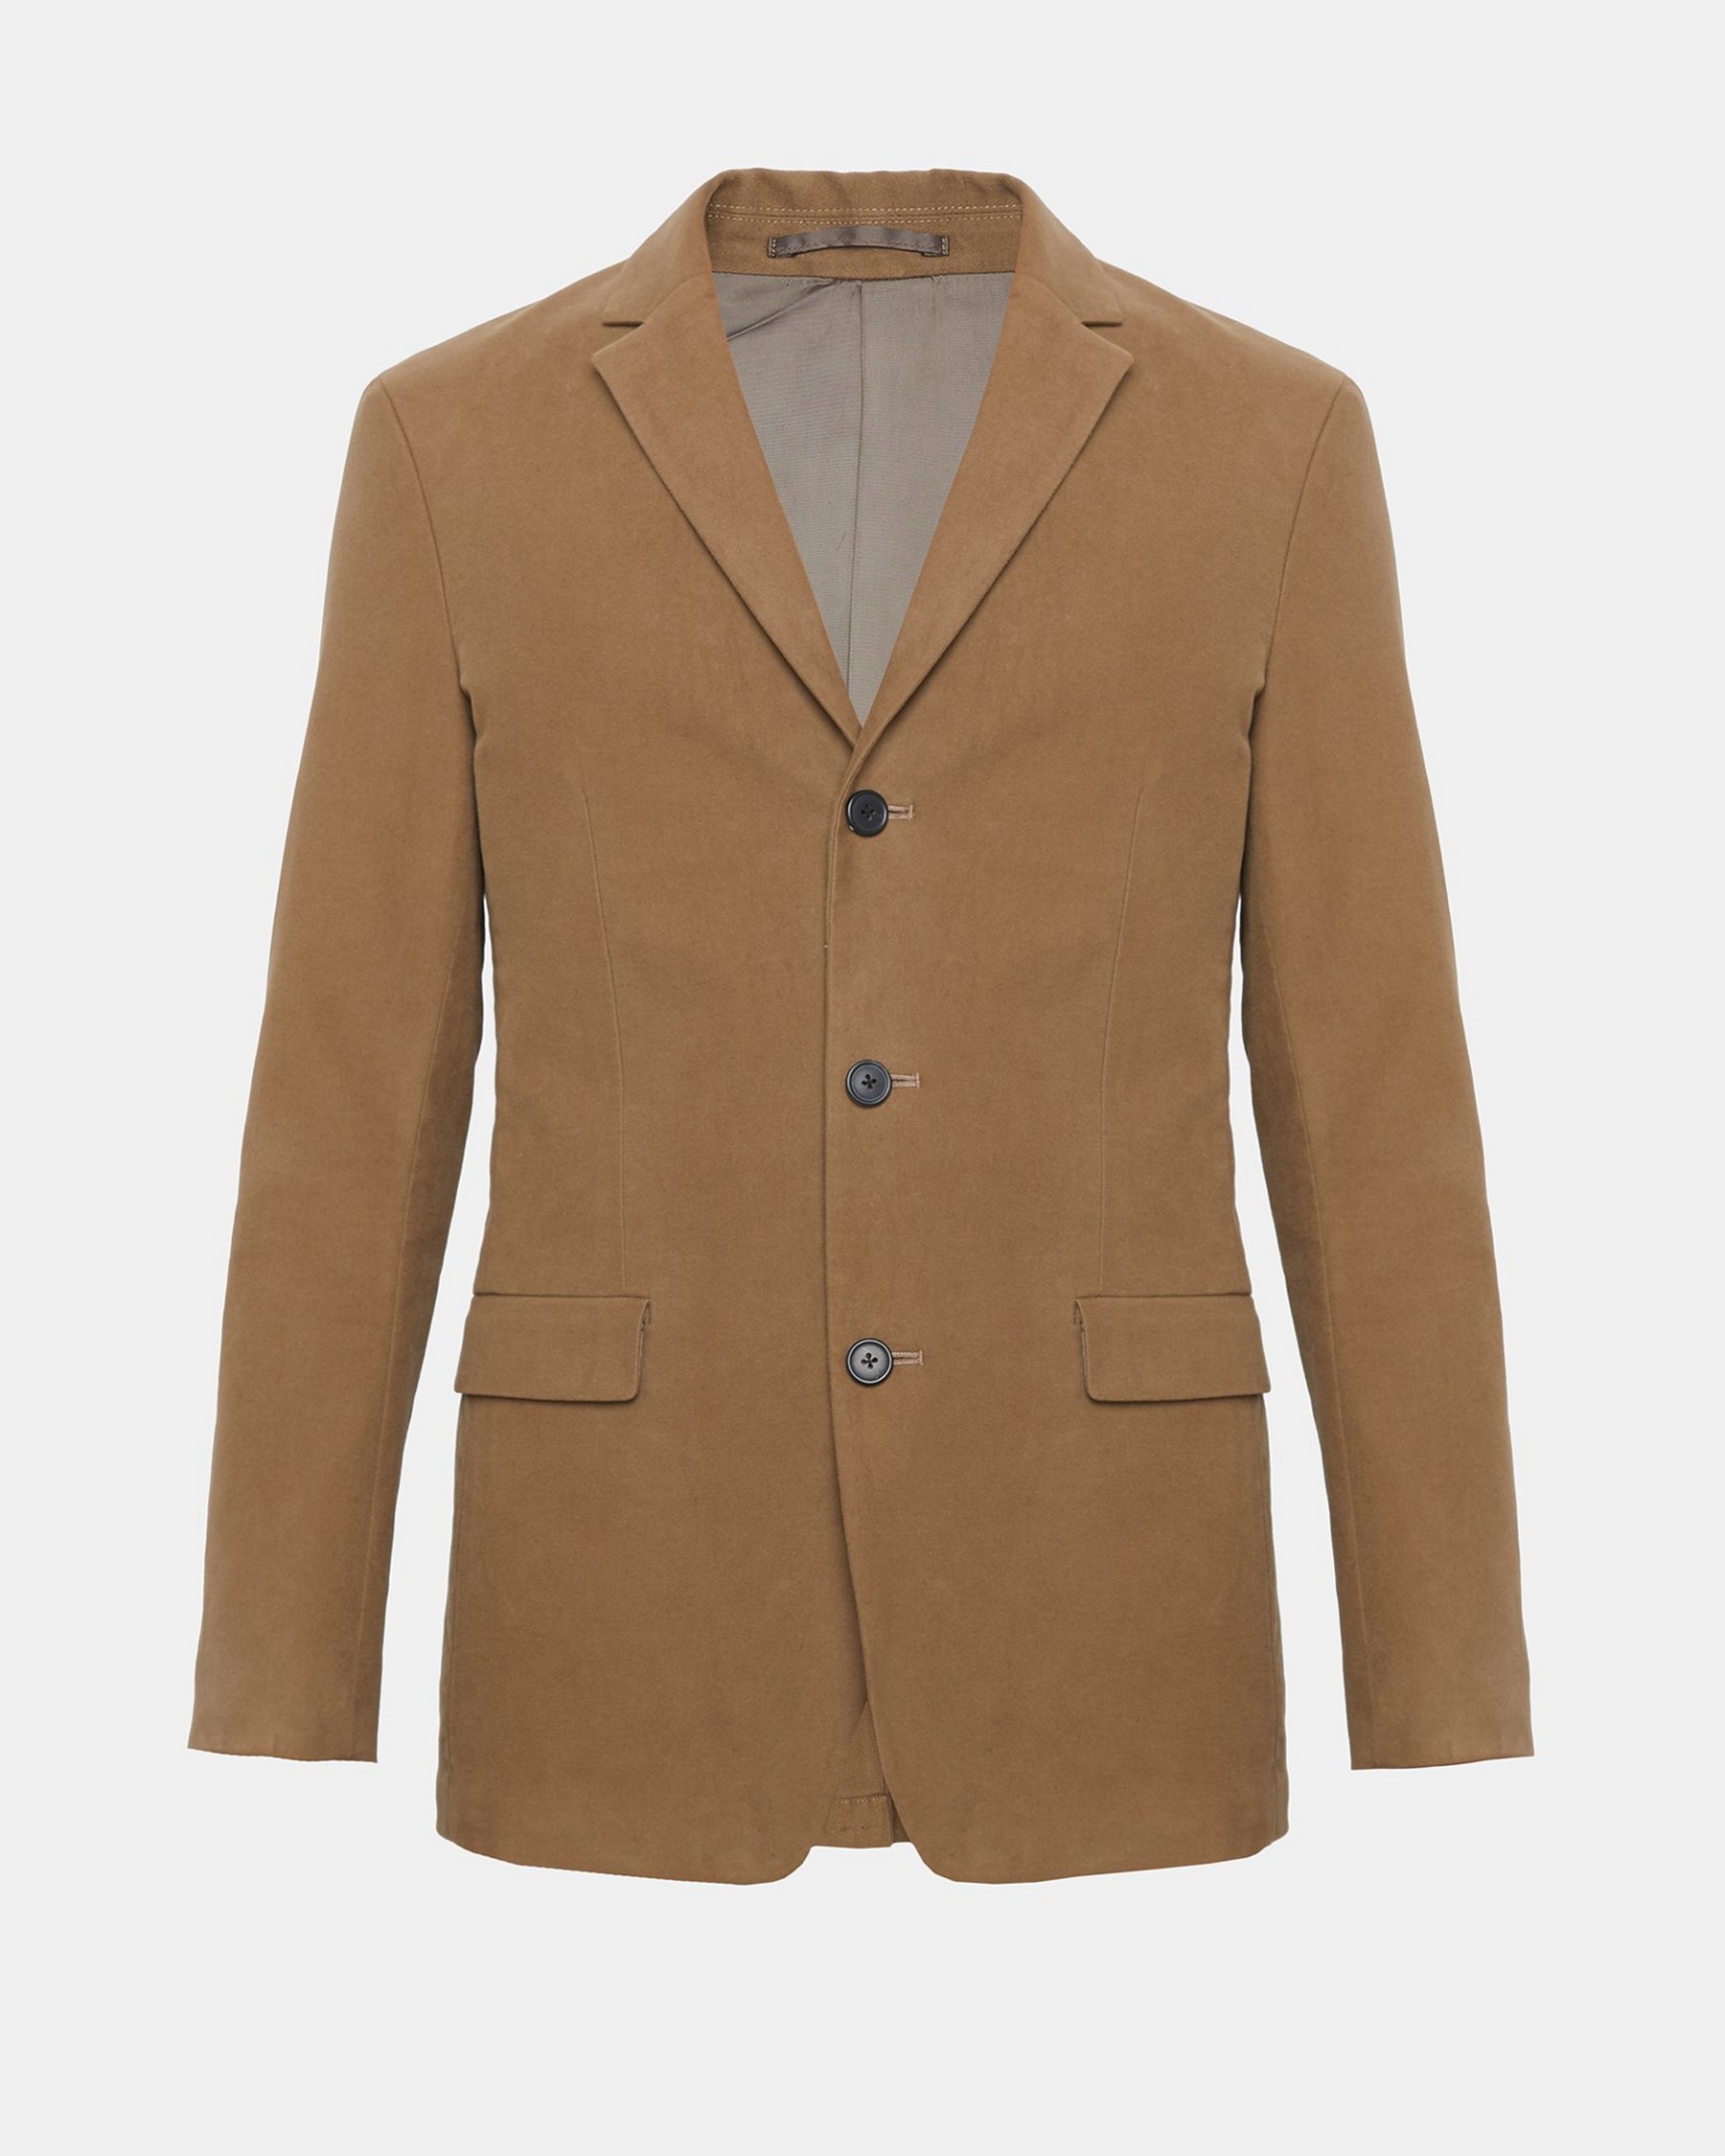 Theory Mens Simons Suit Jacket